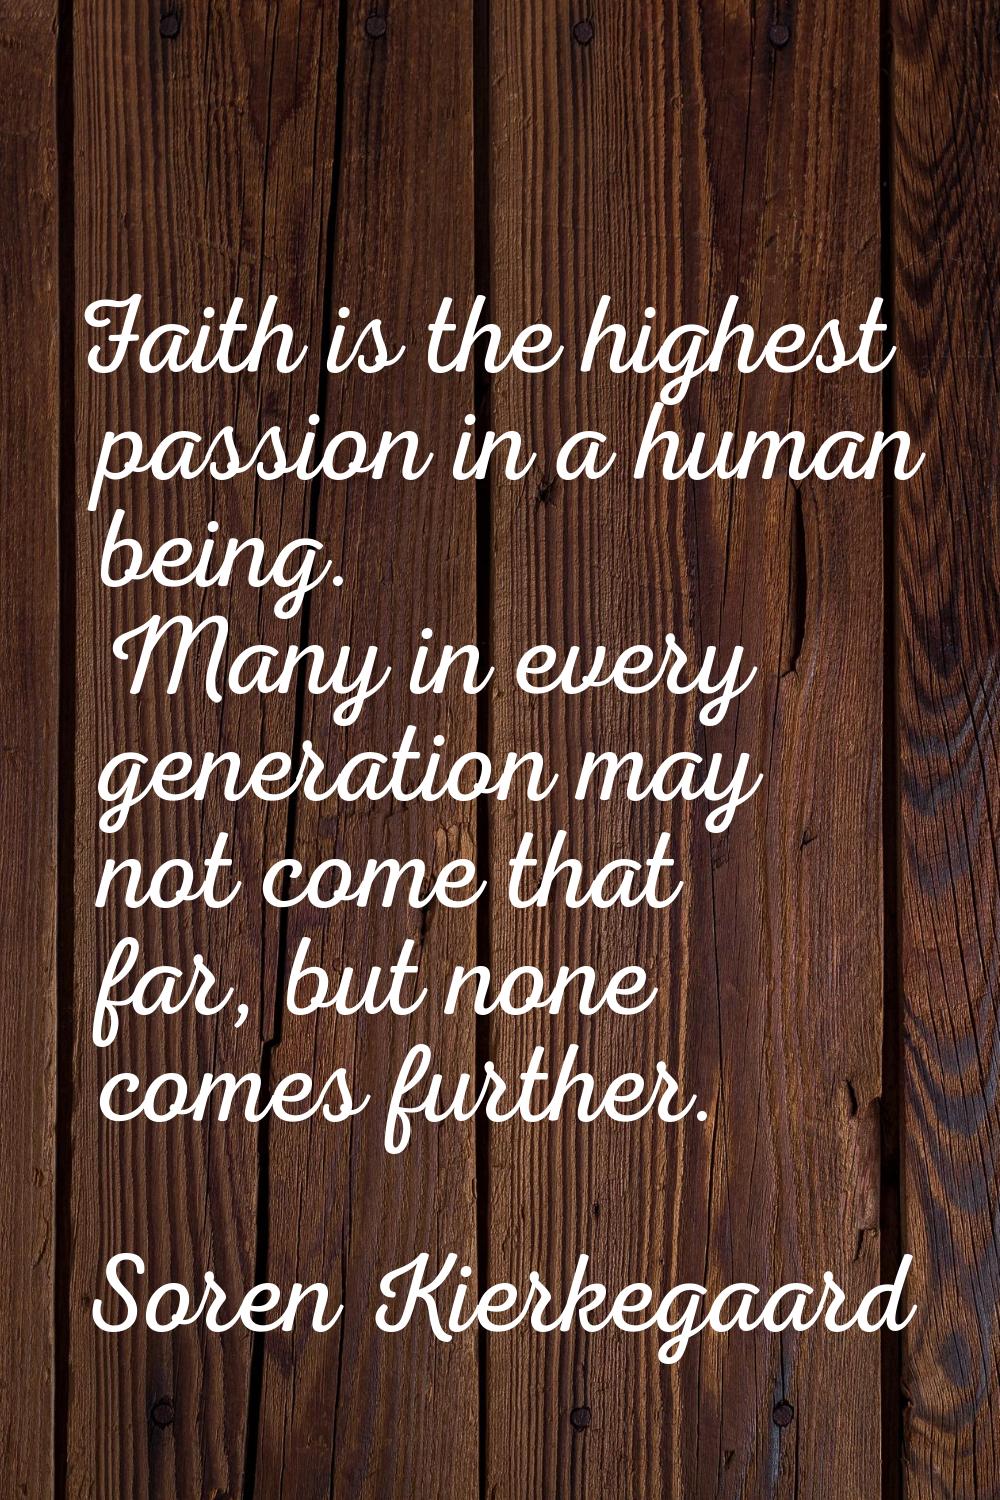 Faith is the highest passion in a human being. Many in every generation may not come that far, but 